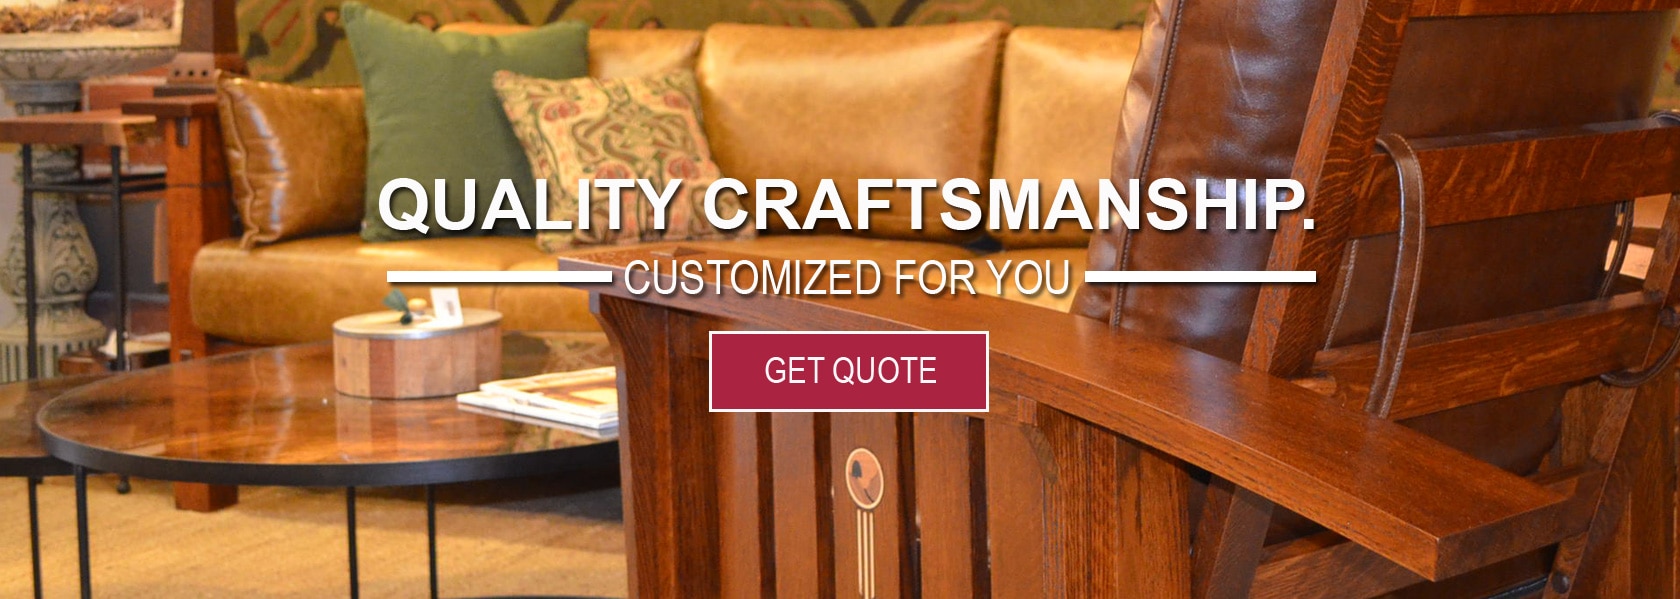 Mission Motif Arts And Crafts Style Furniture